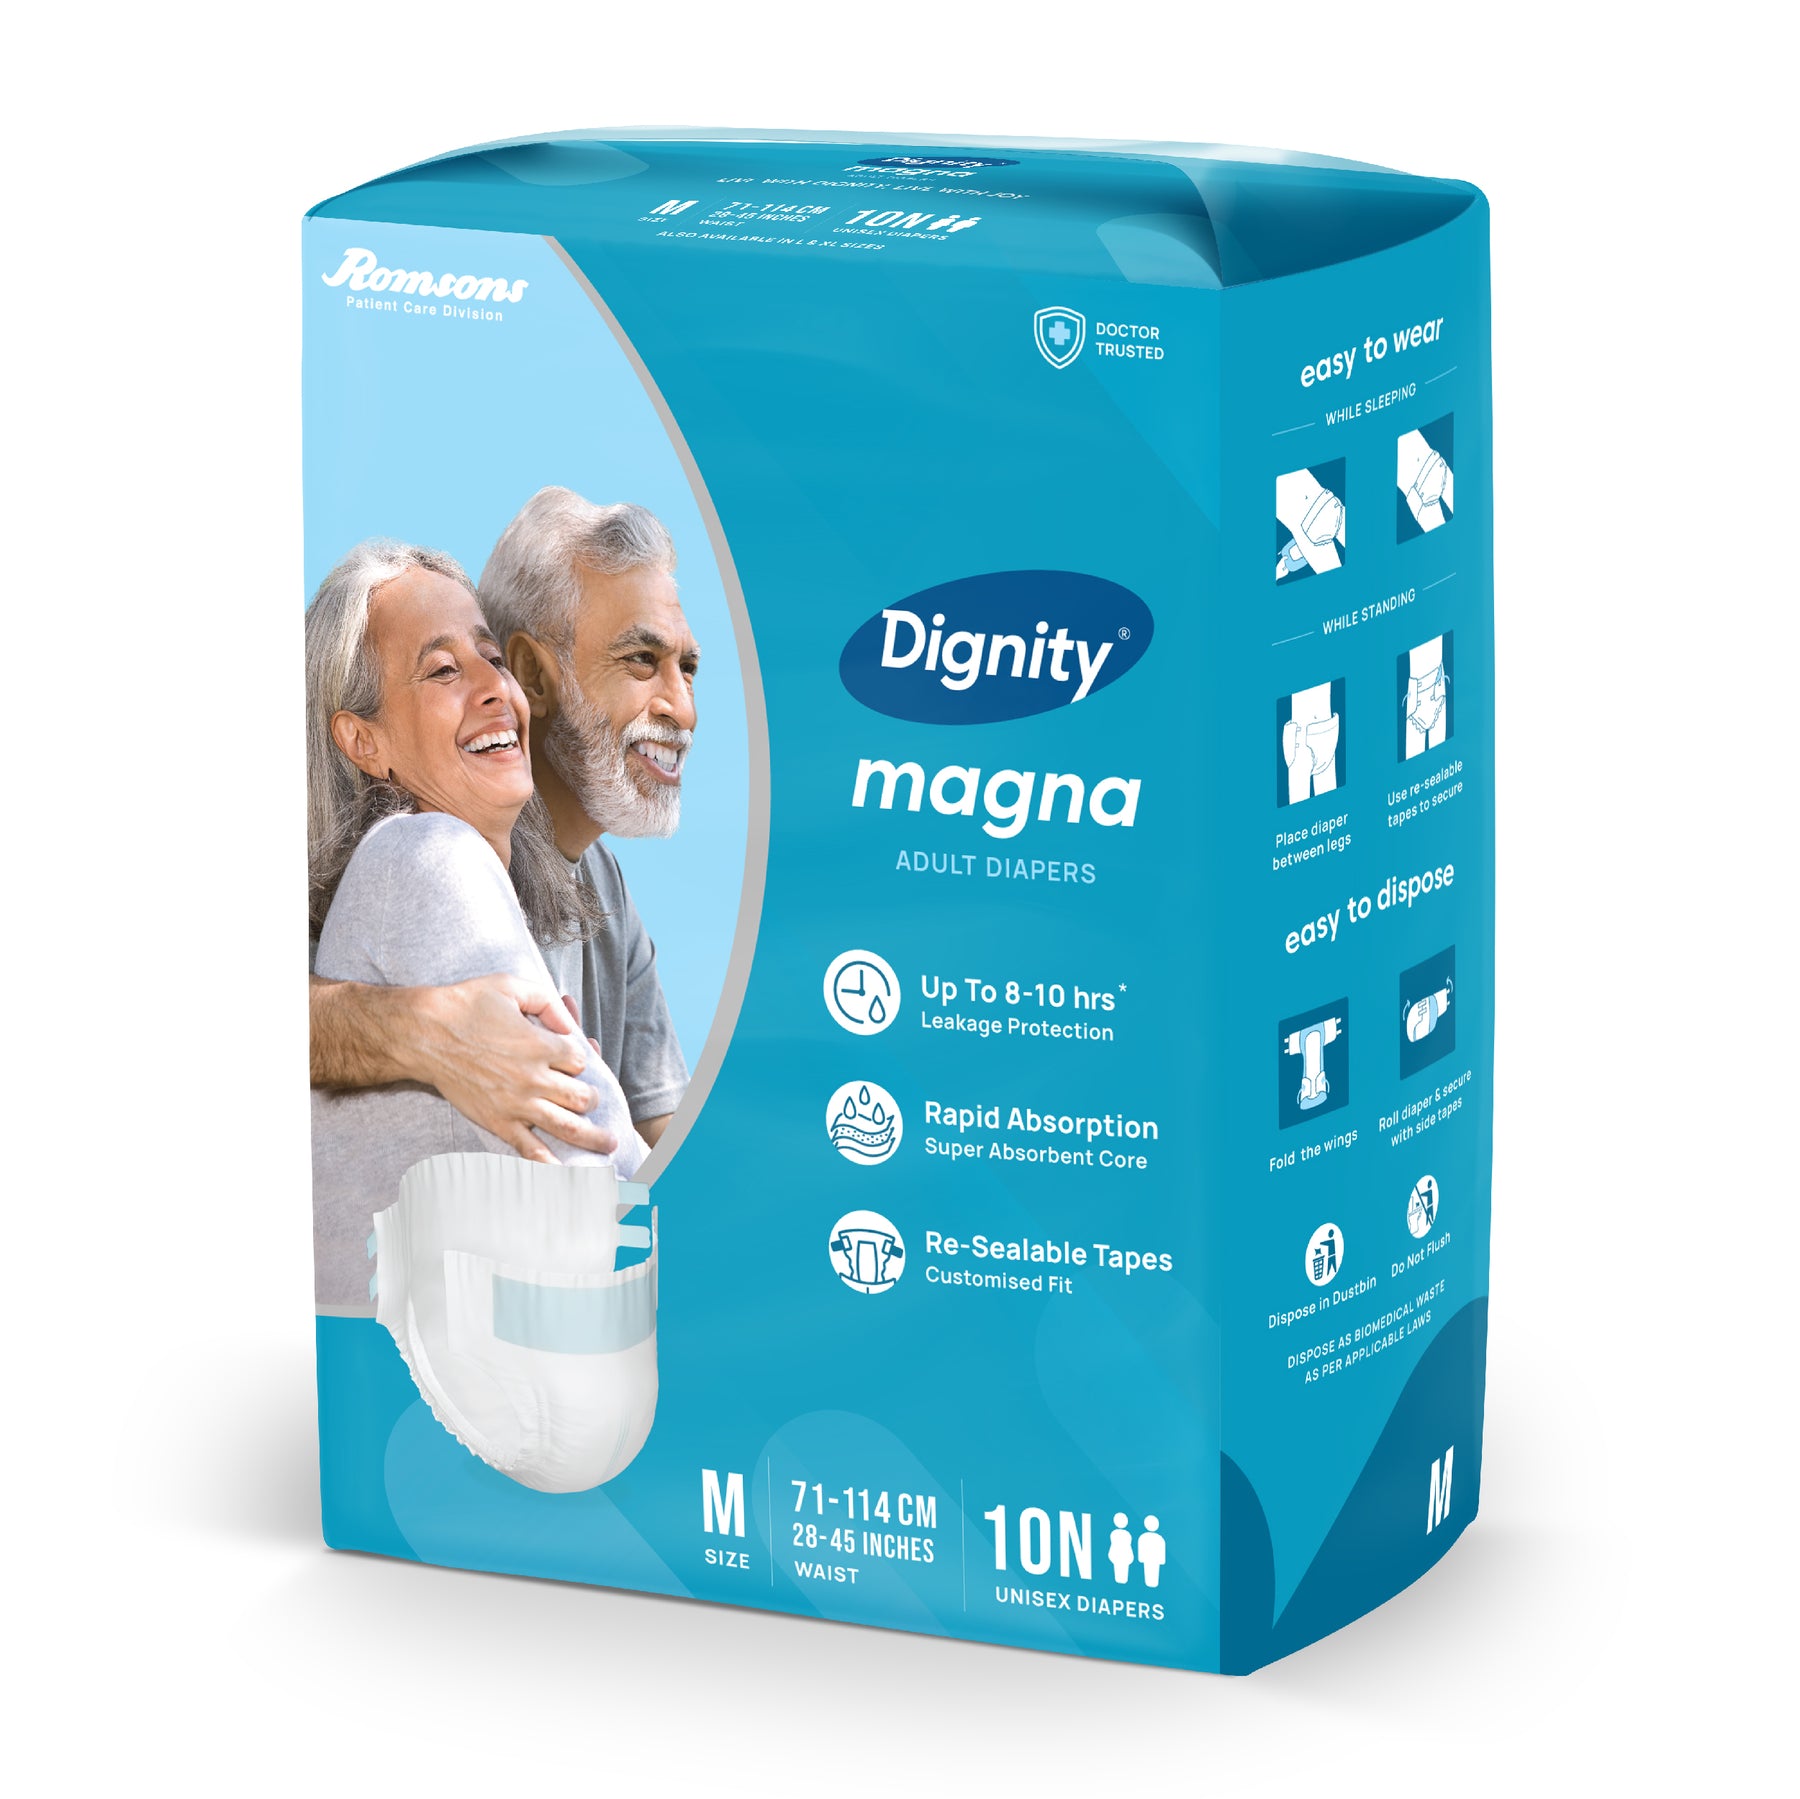 Order Dignity Magna Adult Diapers for Complete Leak-Proof